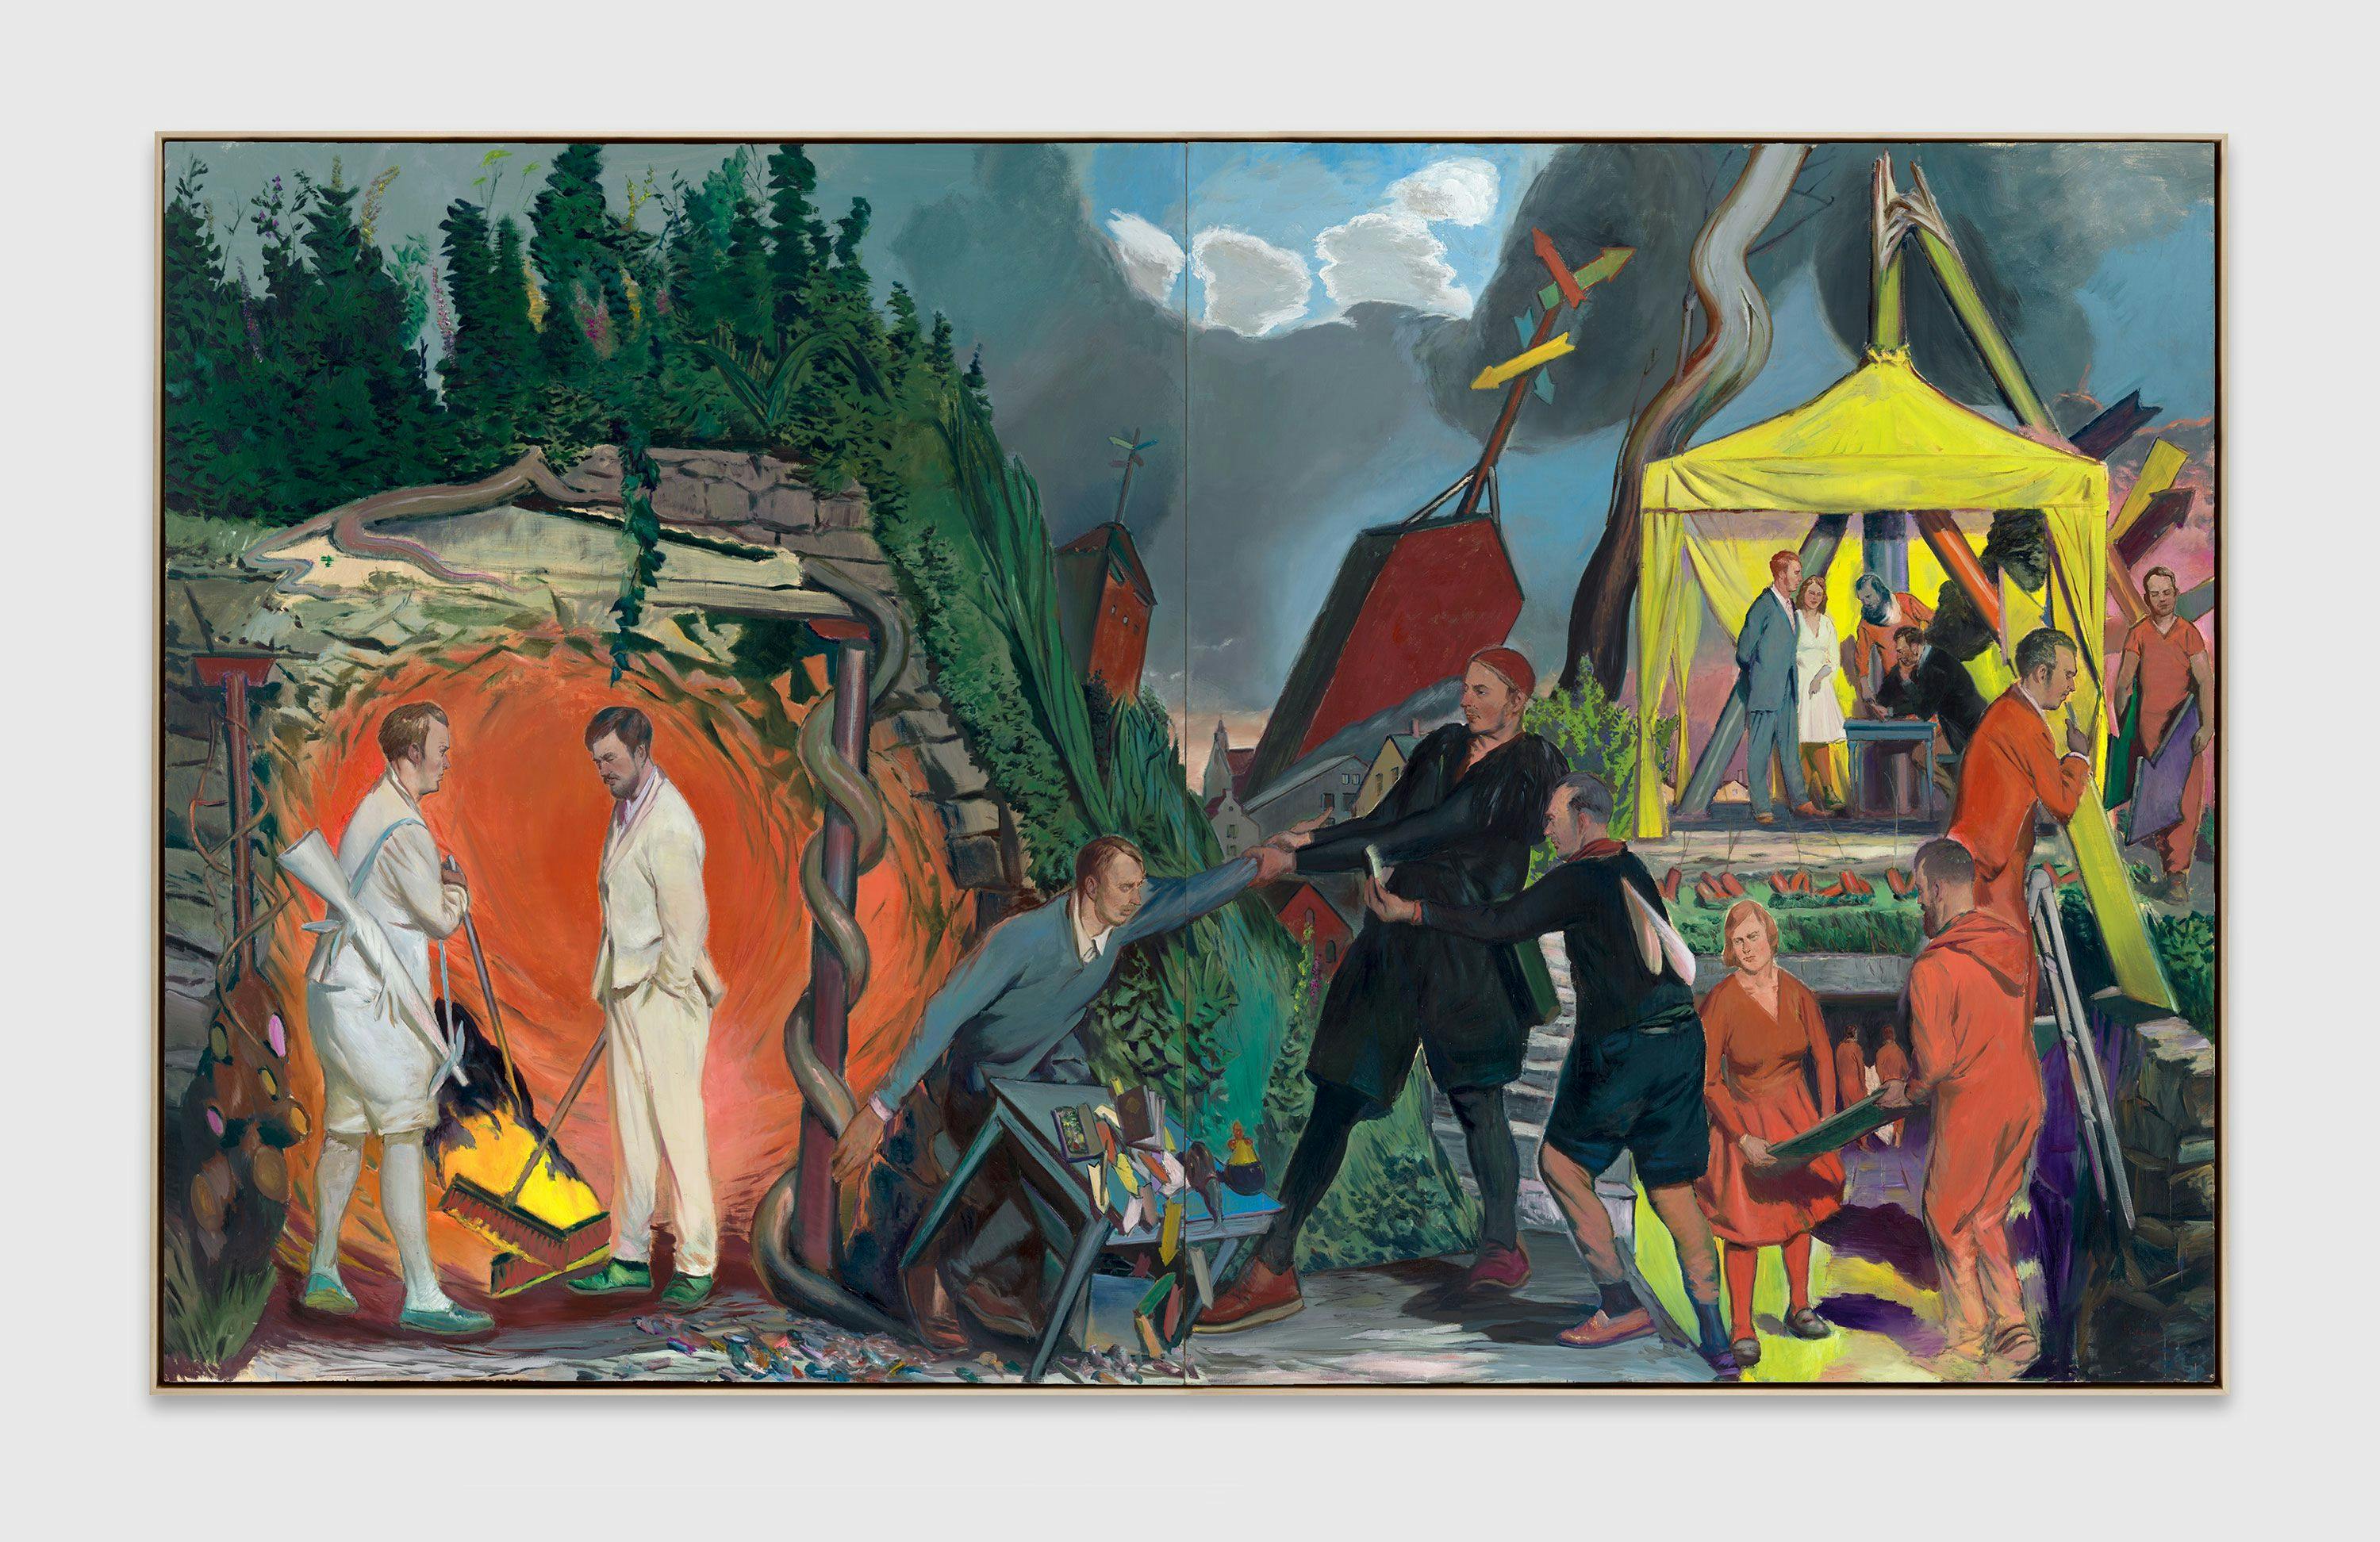 A painting by Neo Rauch, titled Der Zwiespalt, dated 2021.